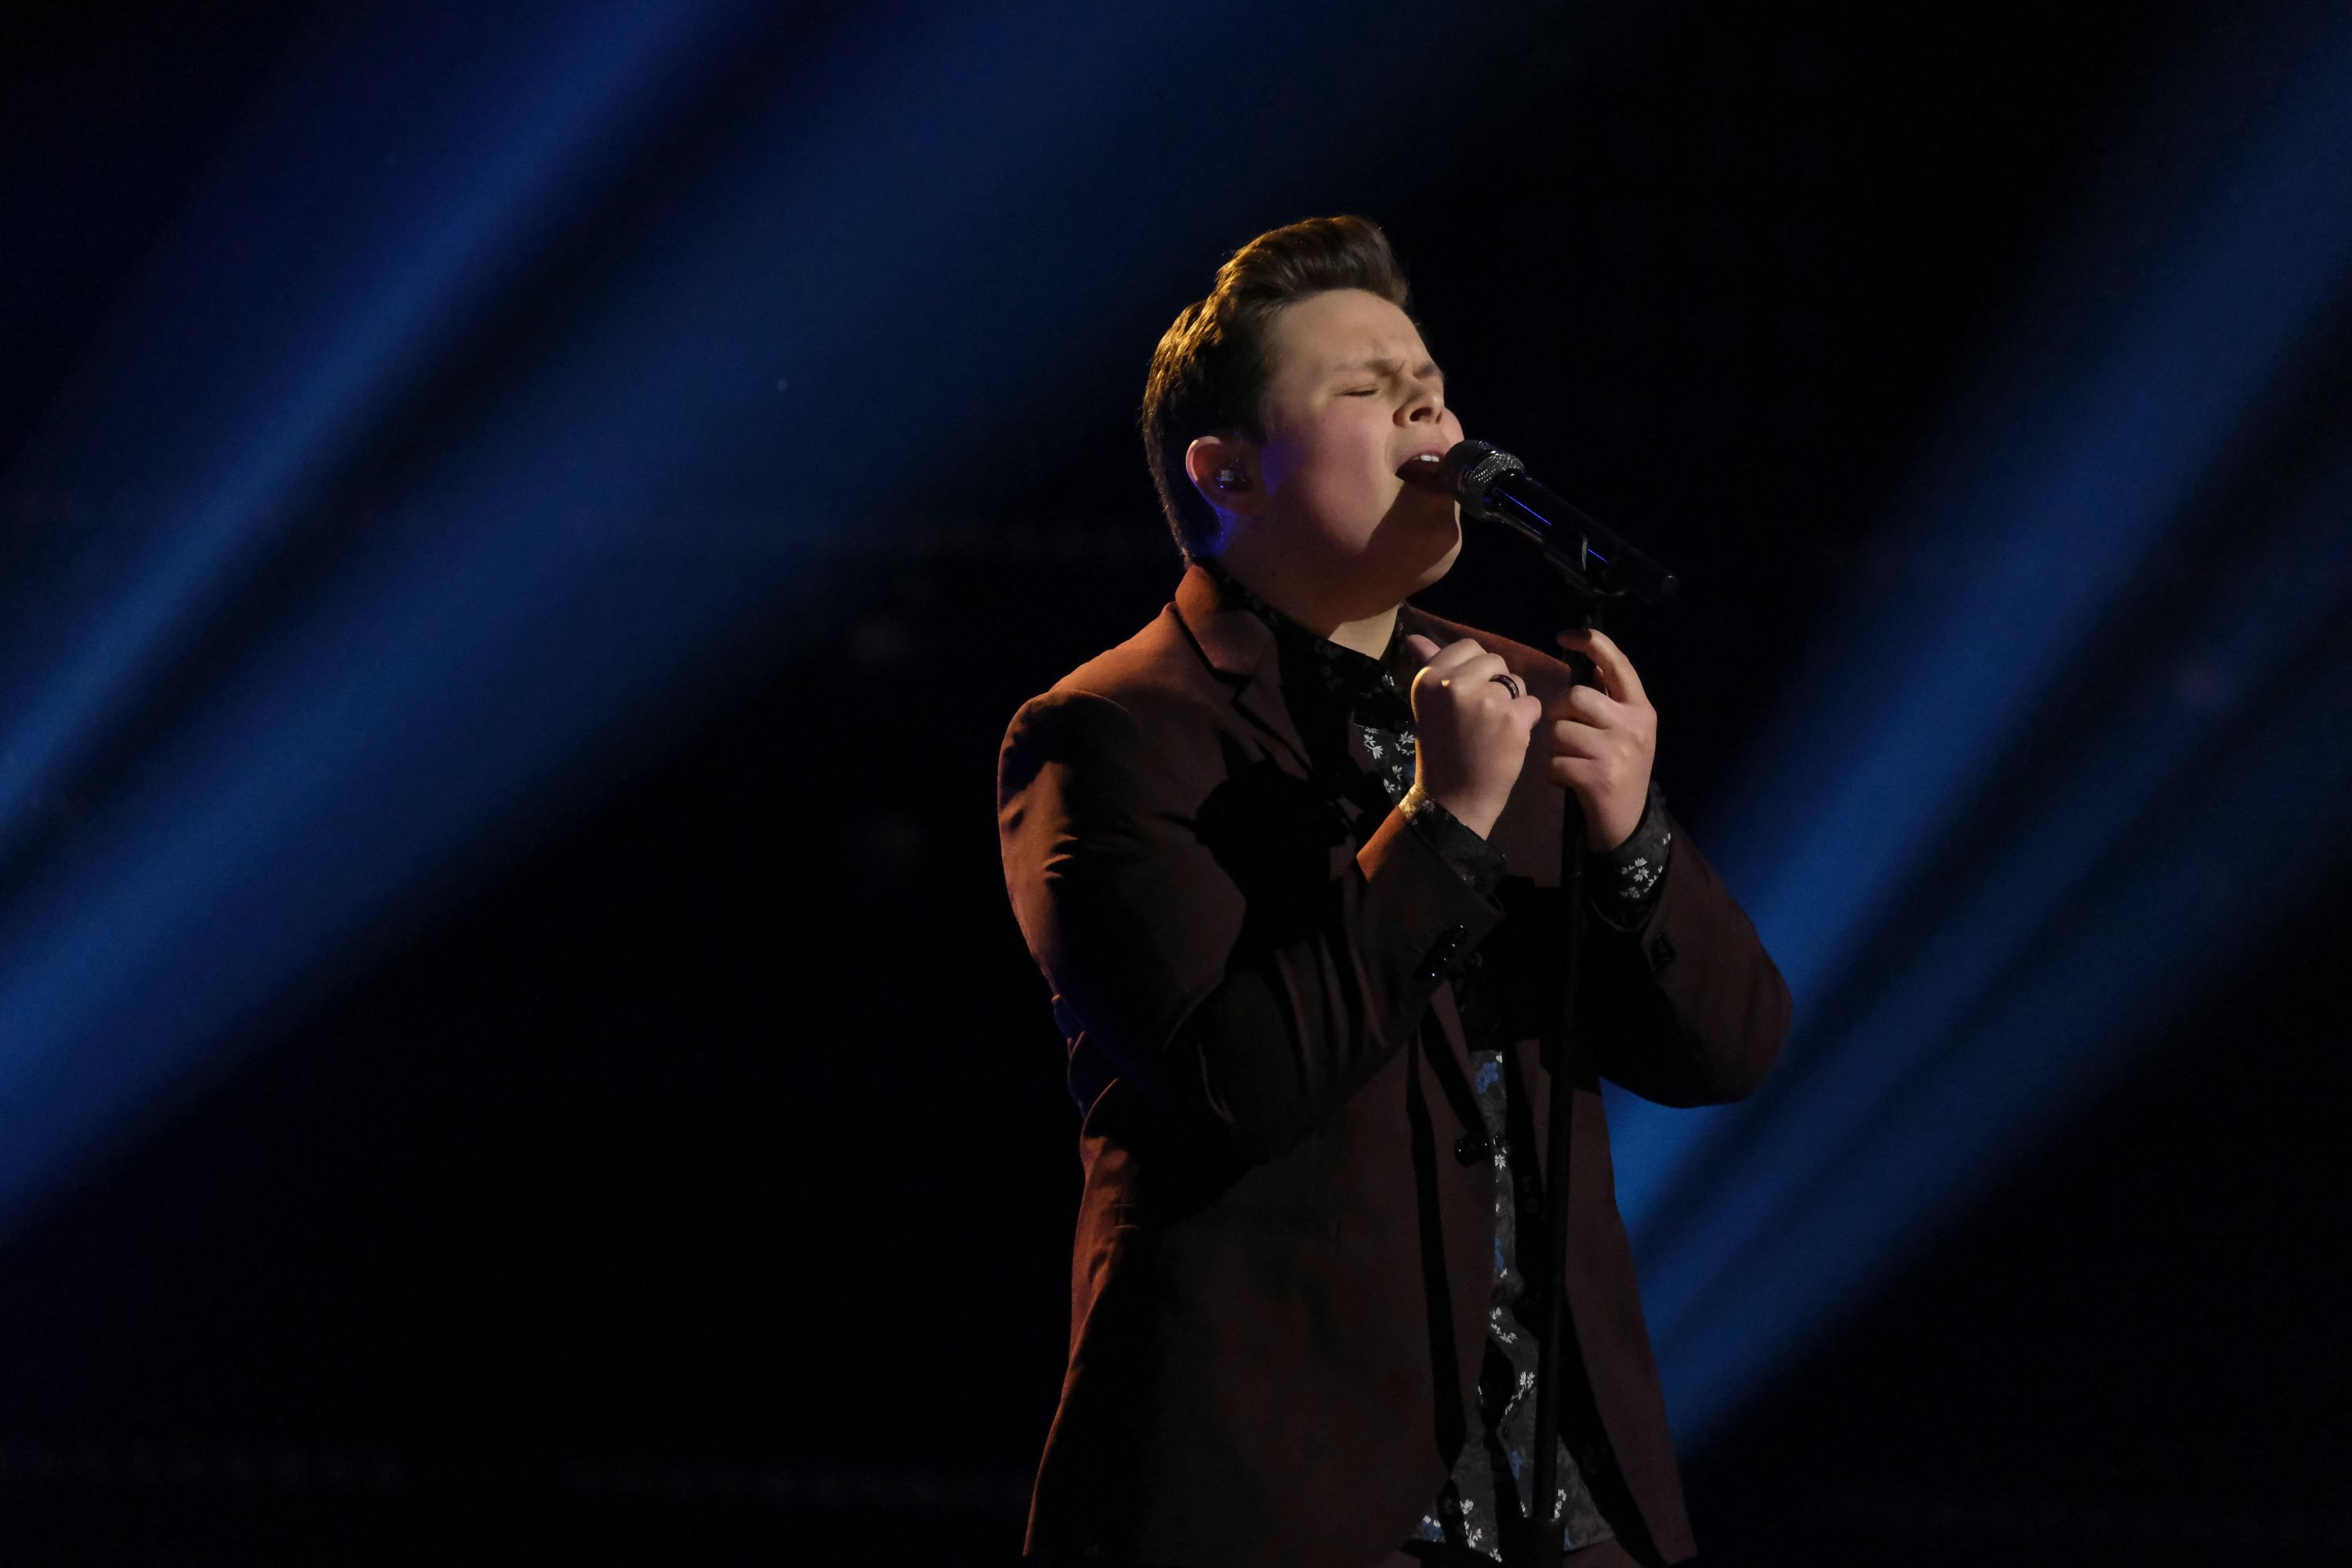 Carter Rubin singing on season 19 of "The Voice" Live Top 17 performances on November 30, 2020 | Photo: Trae Patton/NBC/NBCU Photo Bank/Getty Images